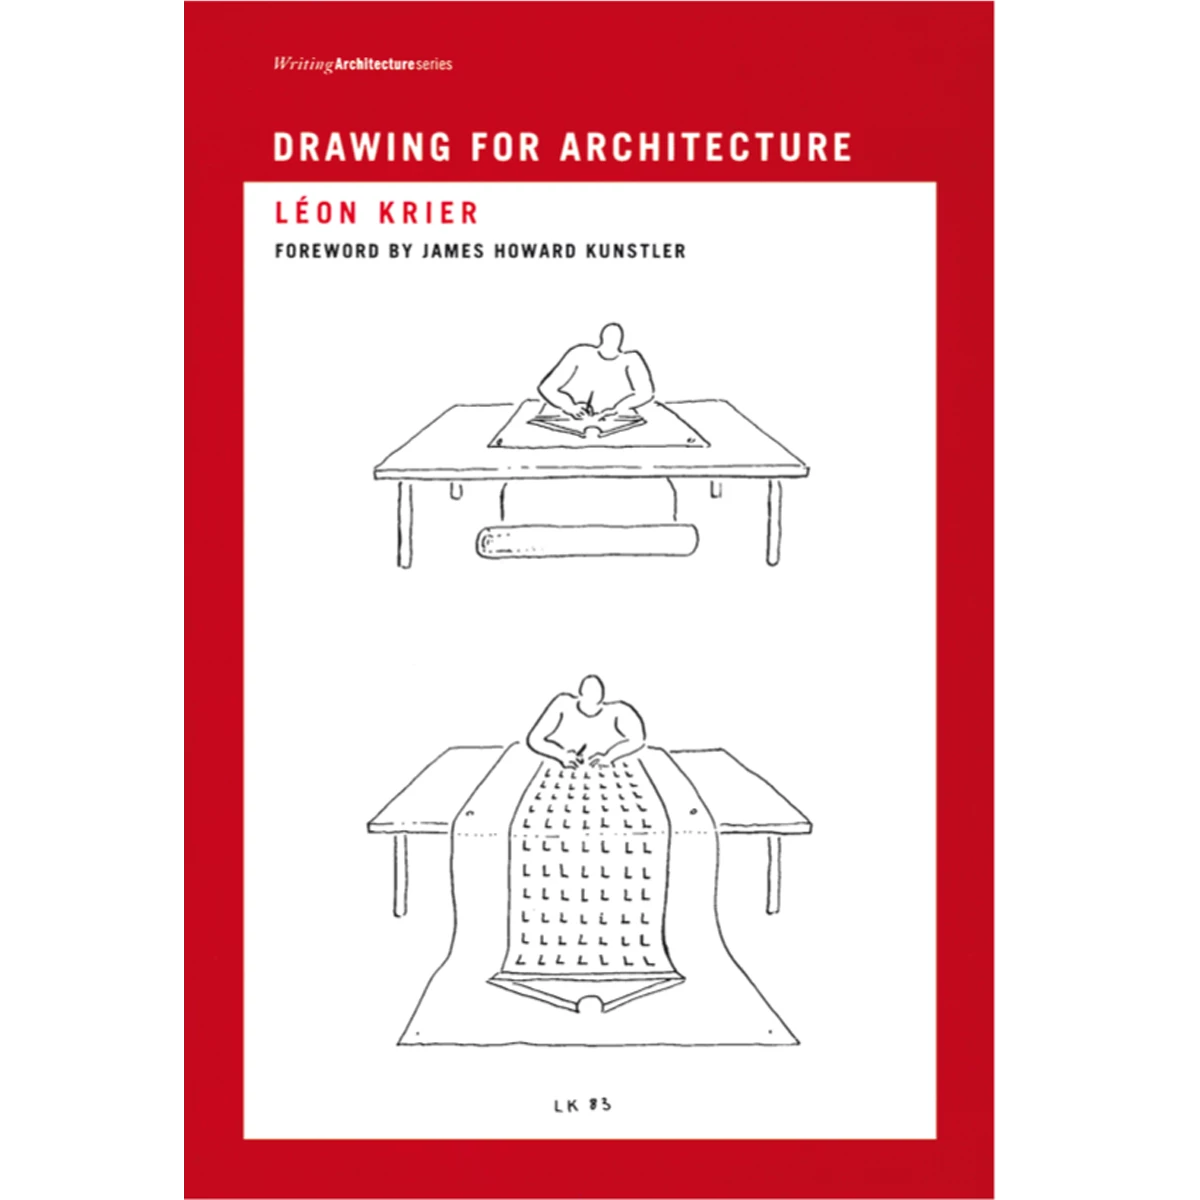 Drawing for Architecture